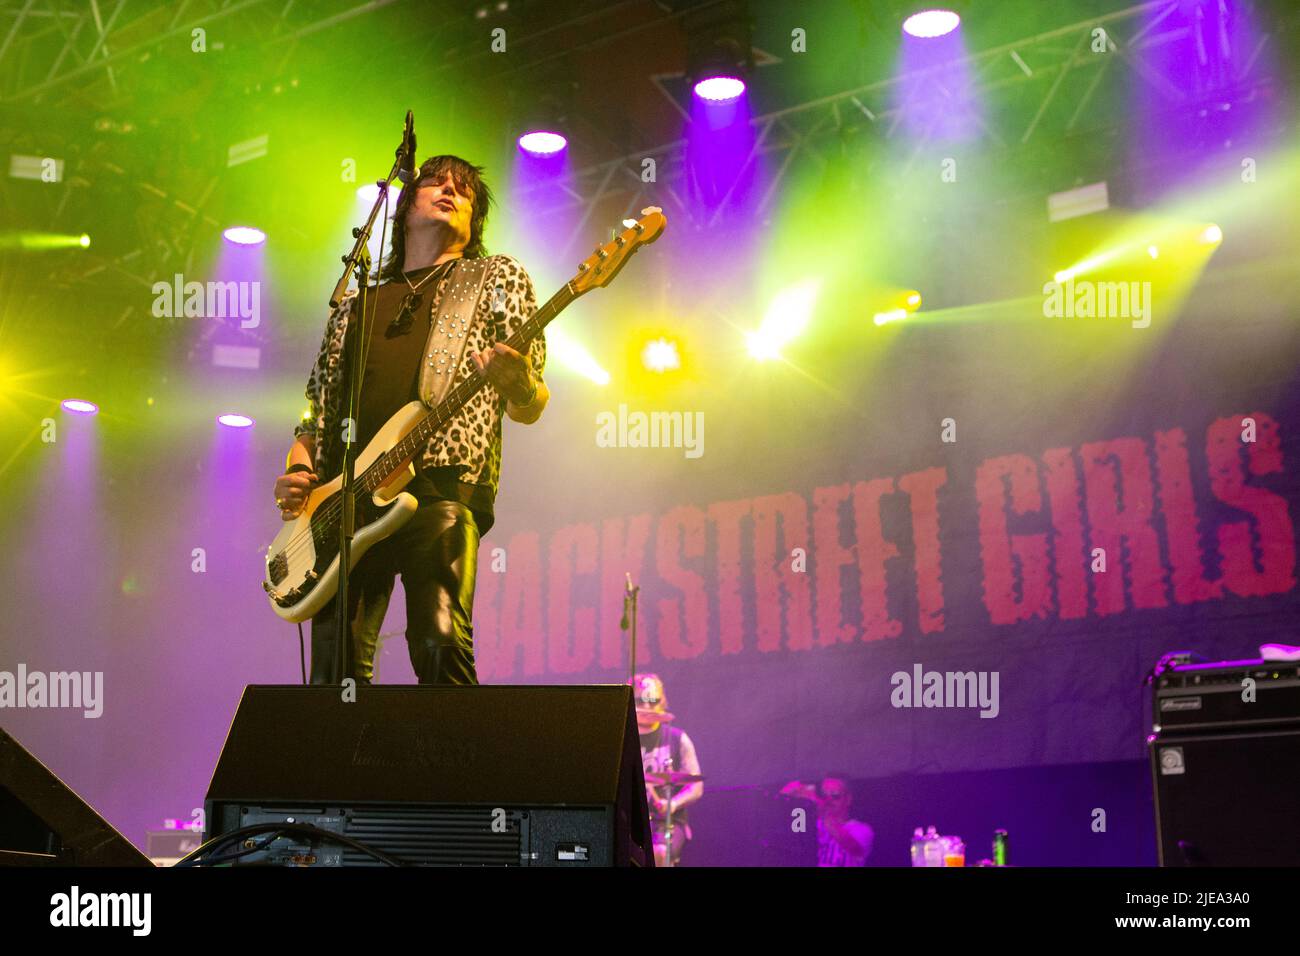 Oslo, Norway. 24th, June 2022. The Norwegian rock band Backstreet Girls performs a live concert during the Norwegian music festival Tons of Rock 2022 in Oslo. Here bass player Gaute Vaag is seen live on stage. (Photo credit: Gonzales Photo - Per-Otto Oppi). Stock Photo